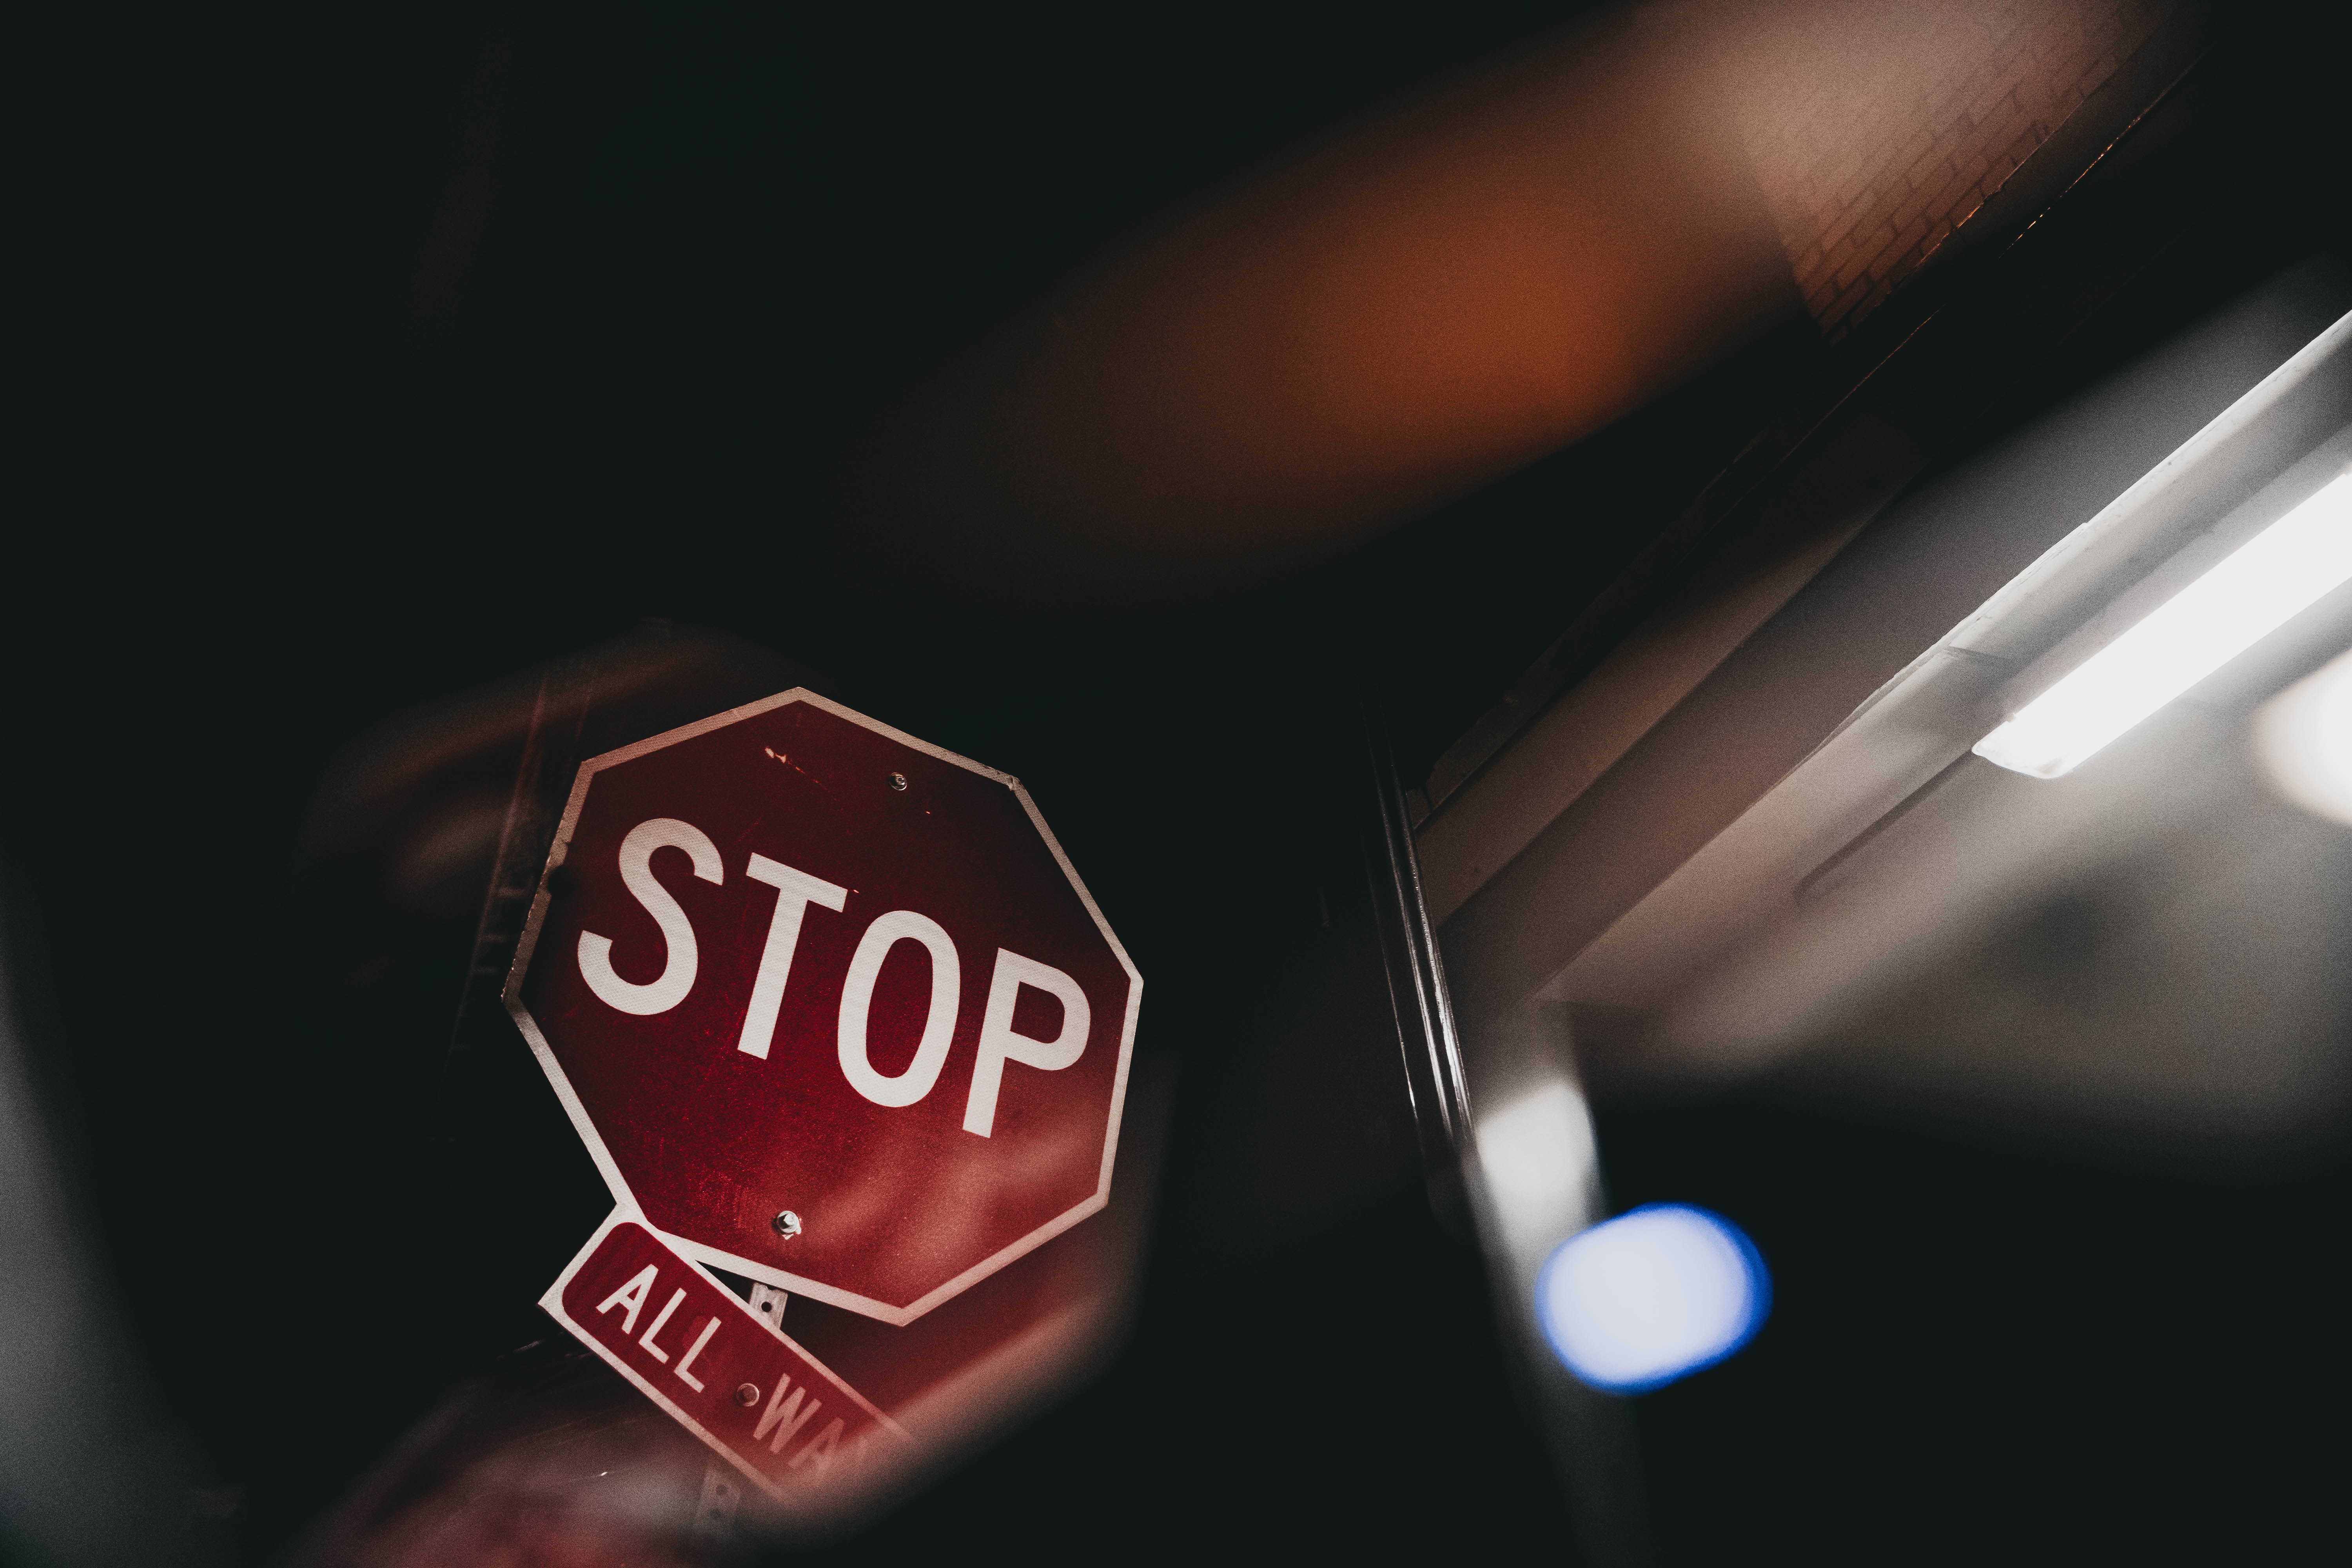 text, words, red, sign, stop, warning